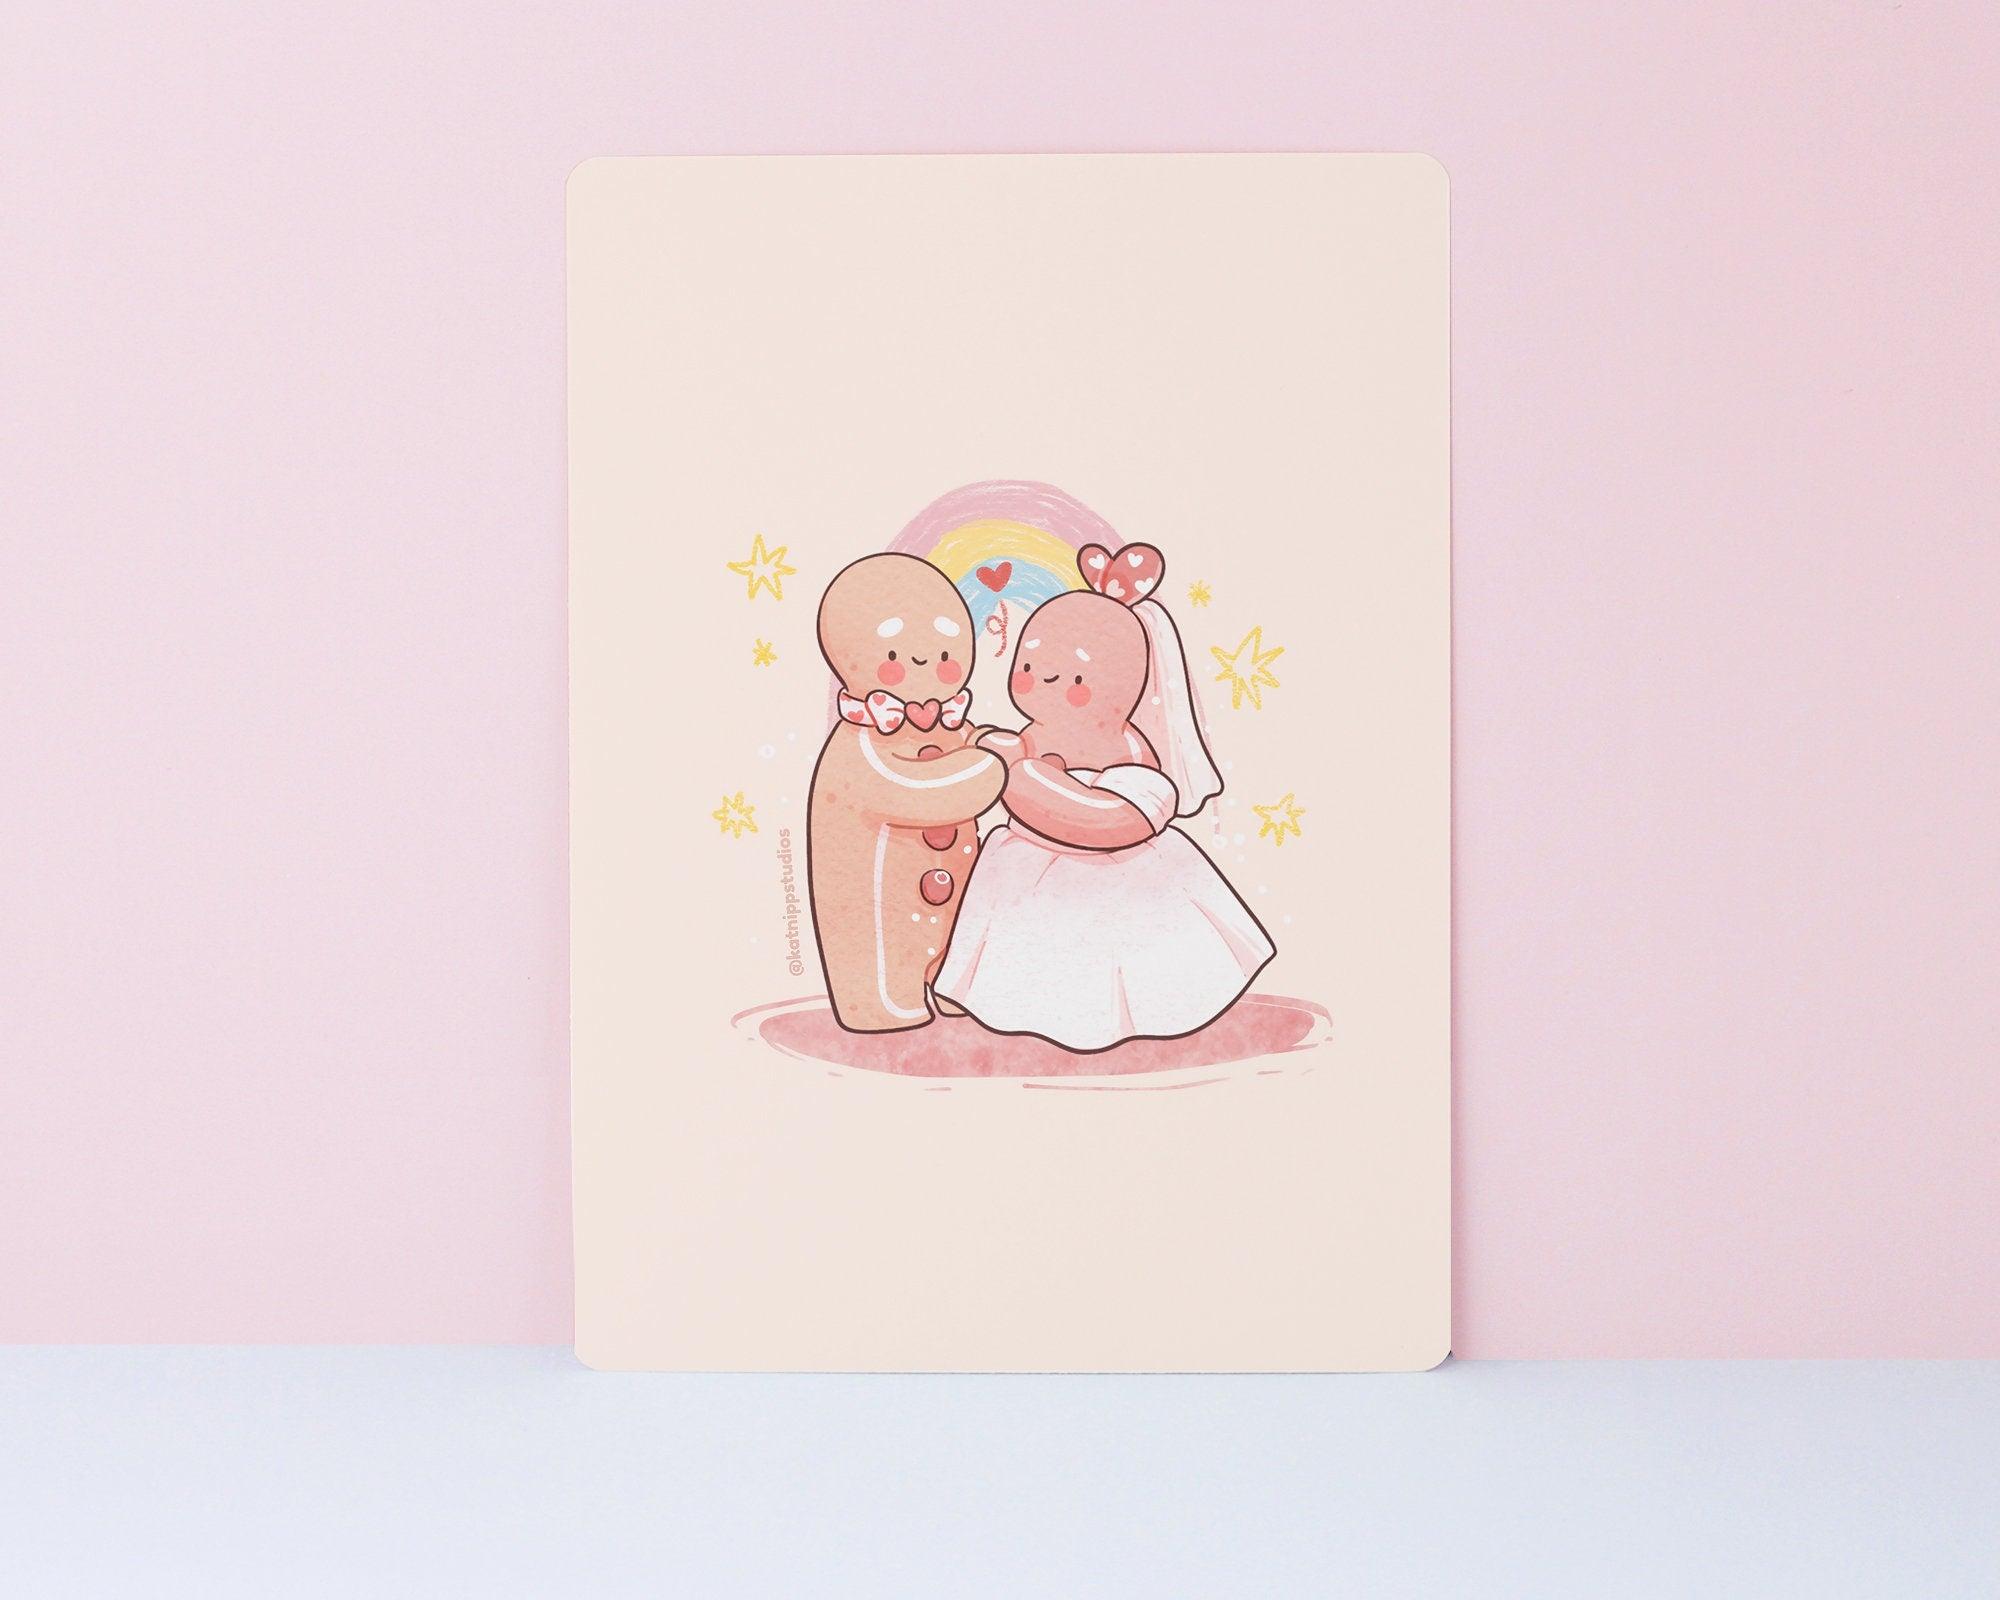 Gingie and Spice get Married! ~ Marriage Art Print - Katnipp Illustrations